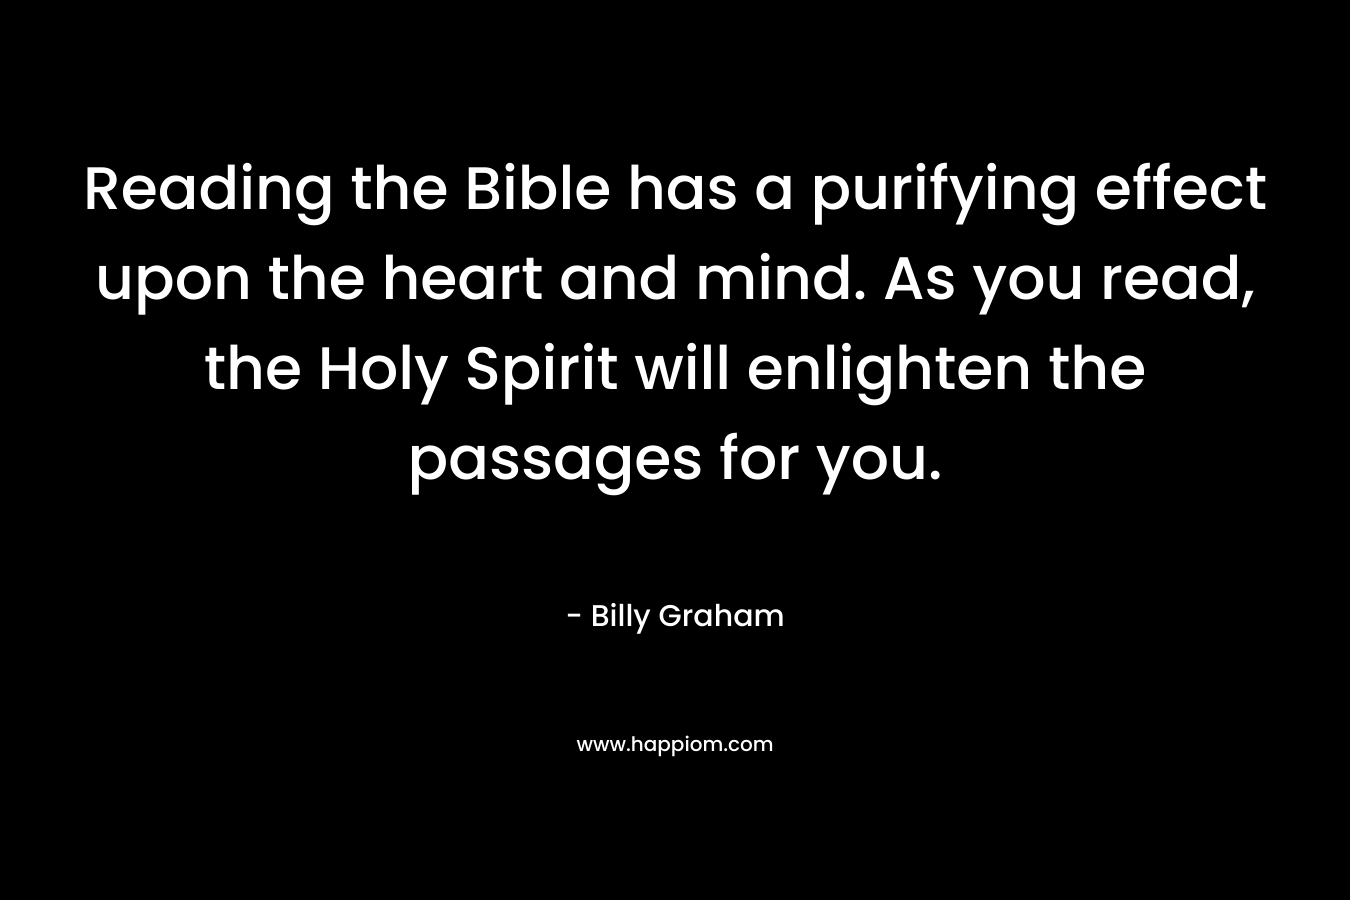 Reading the Bible has a purifying effect upon the heart and mind. As you read, the Holy Spirit will enlighten the passages for you.